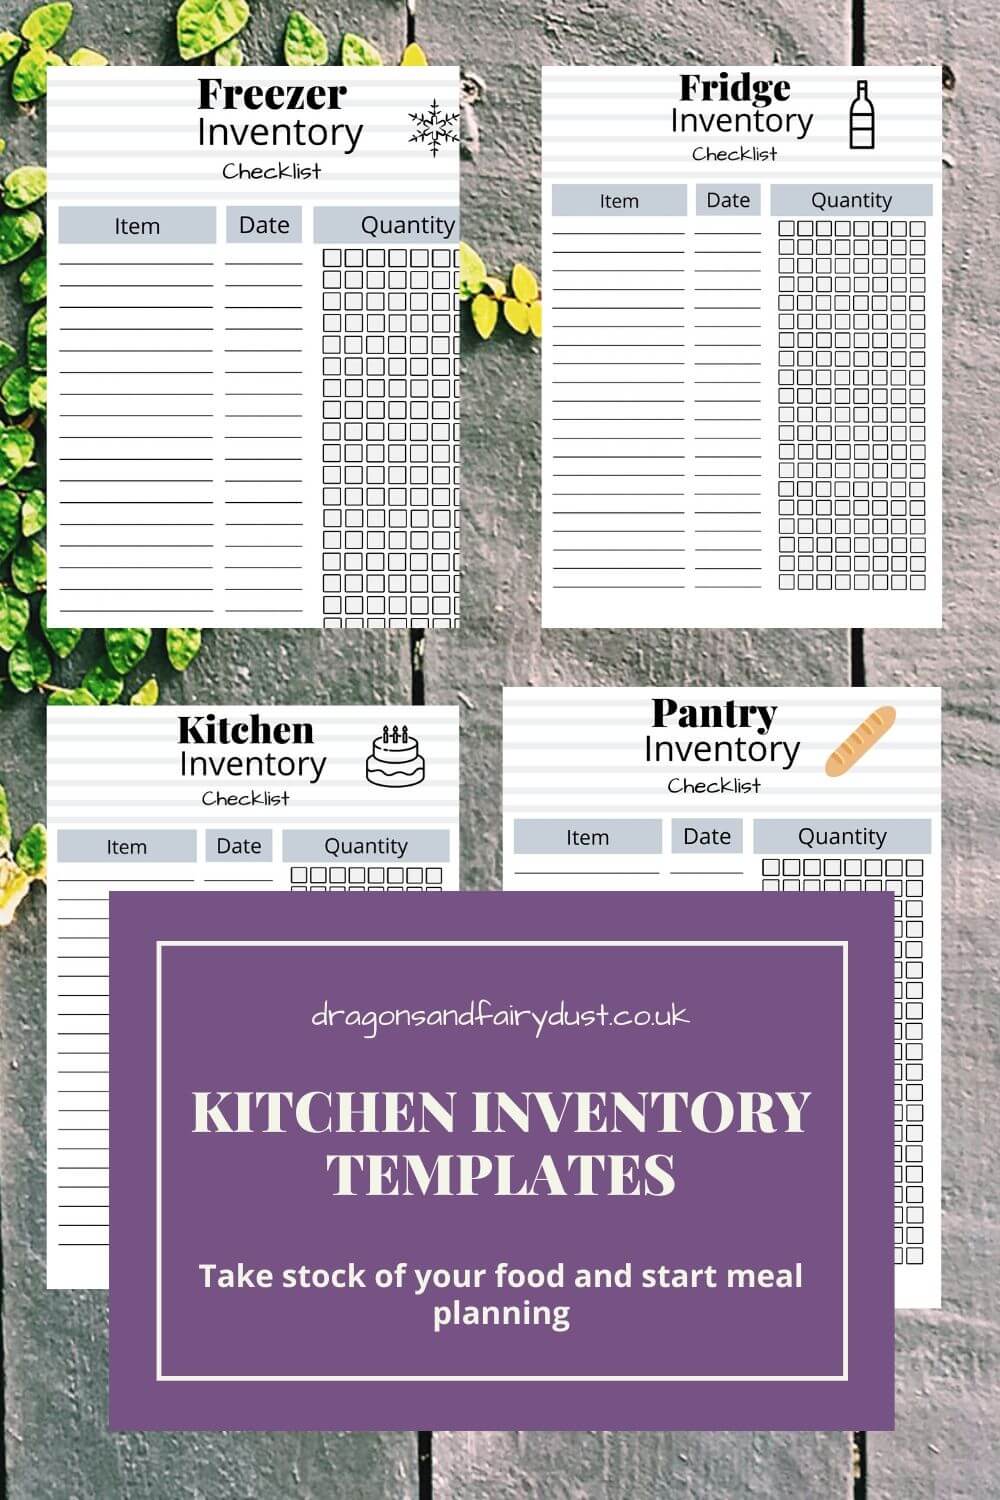 Kitchen Inventory Templates to print out